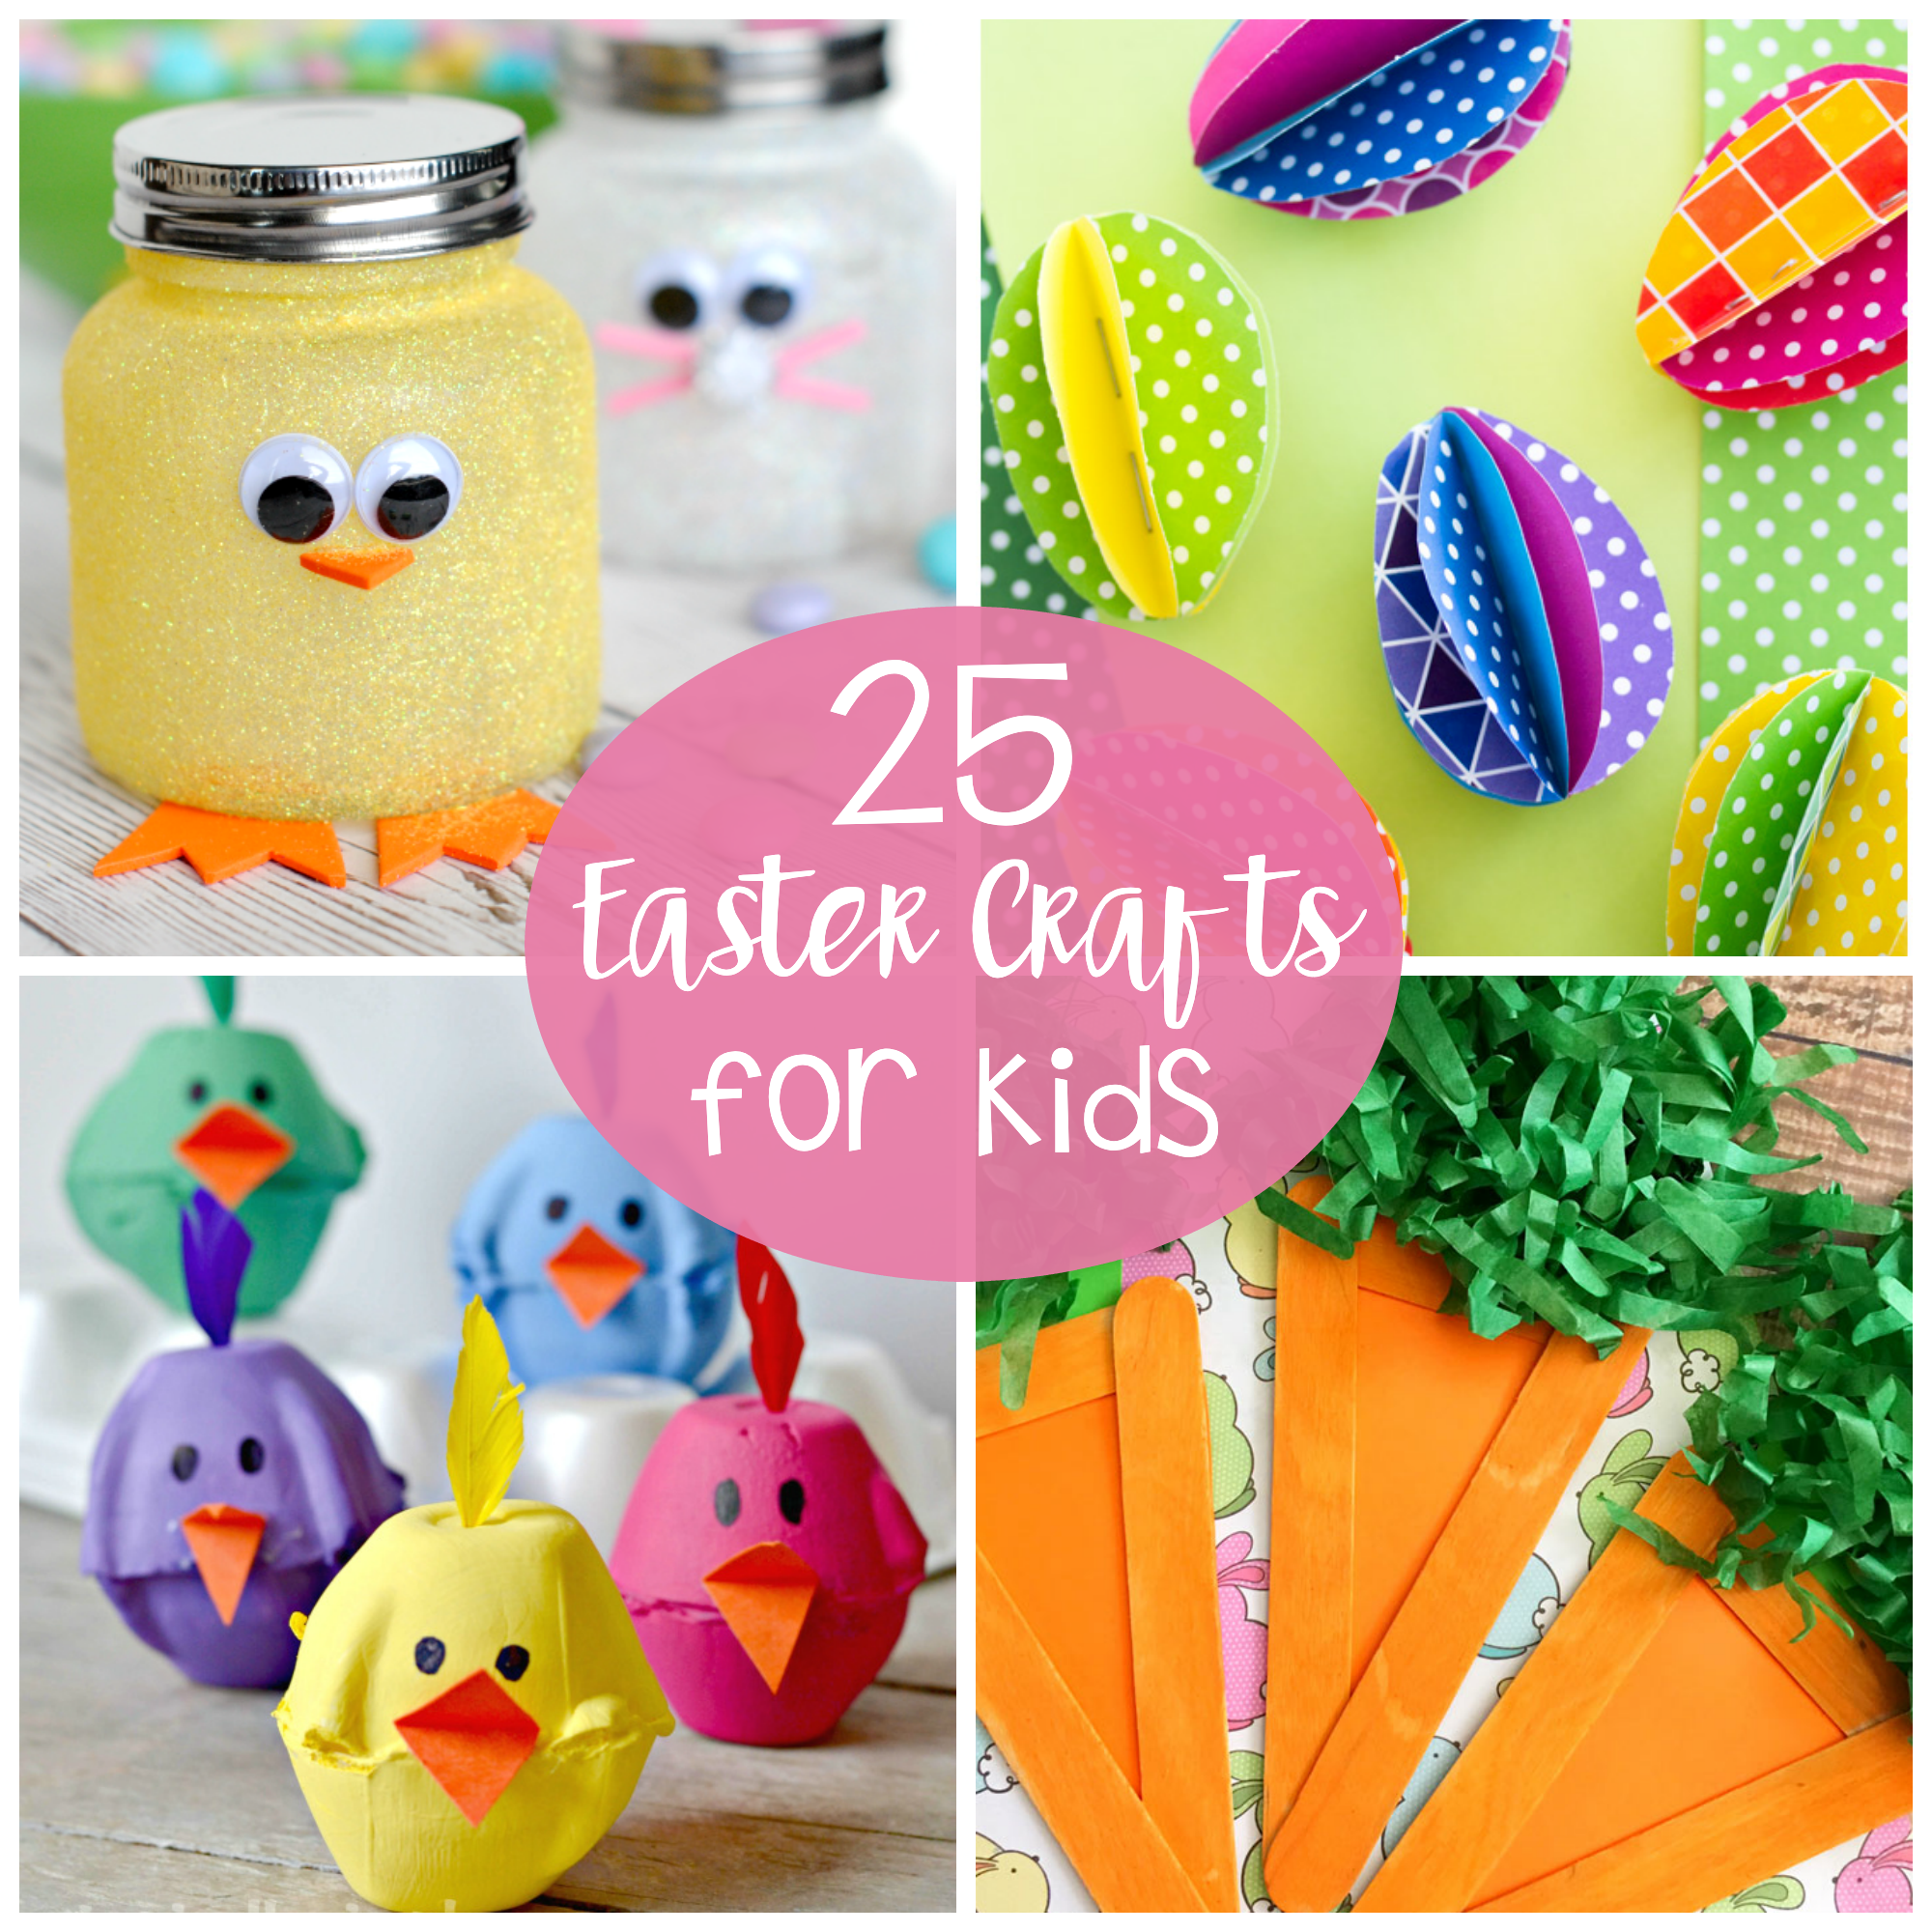 25 Cute and Fun Easter Crafts for Kids